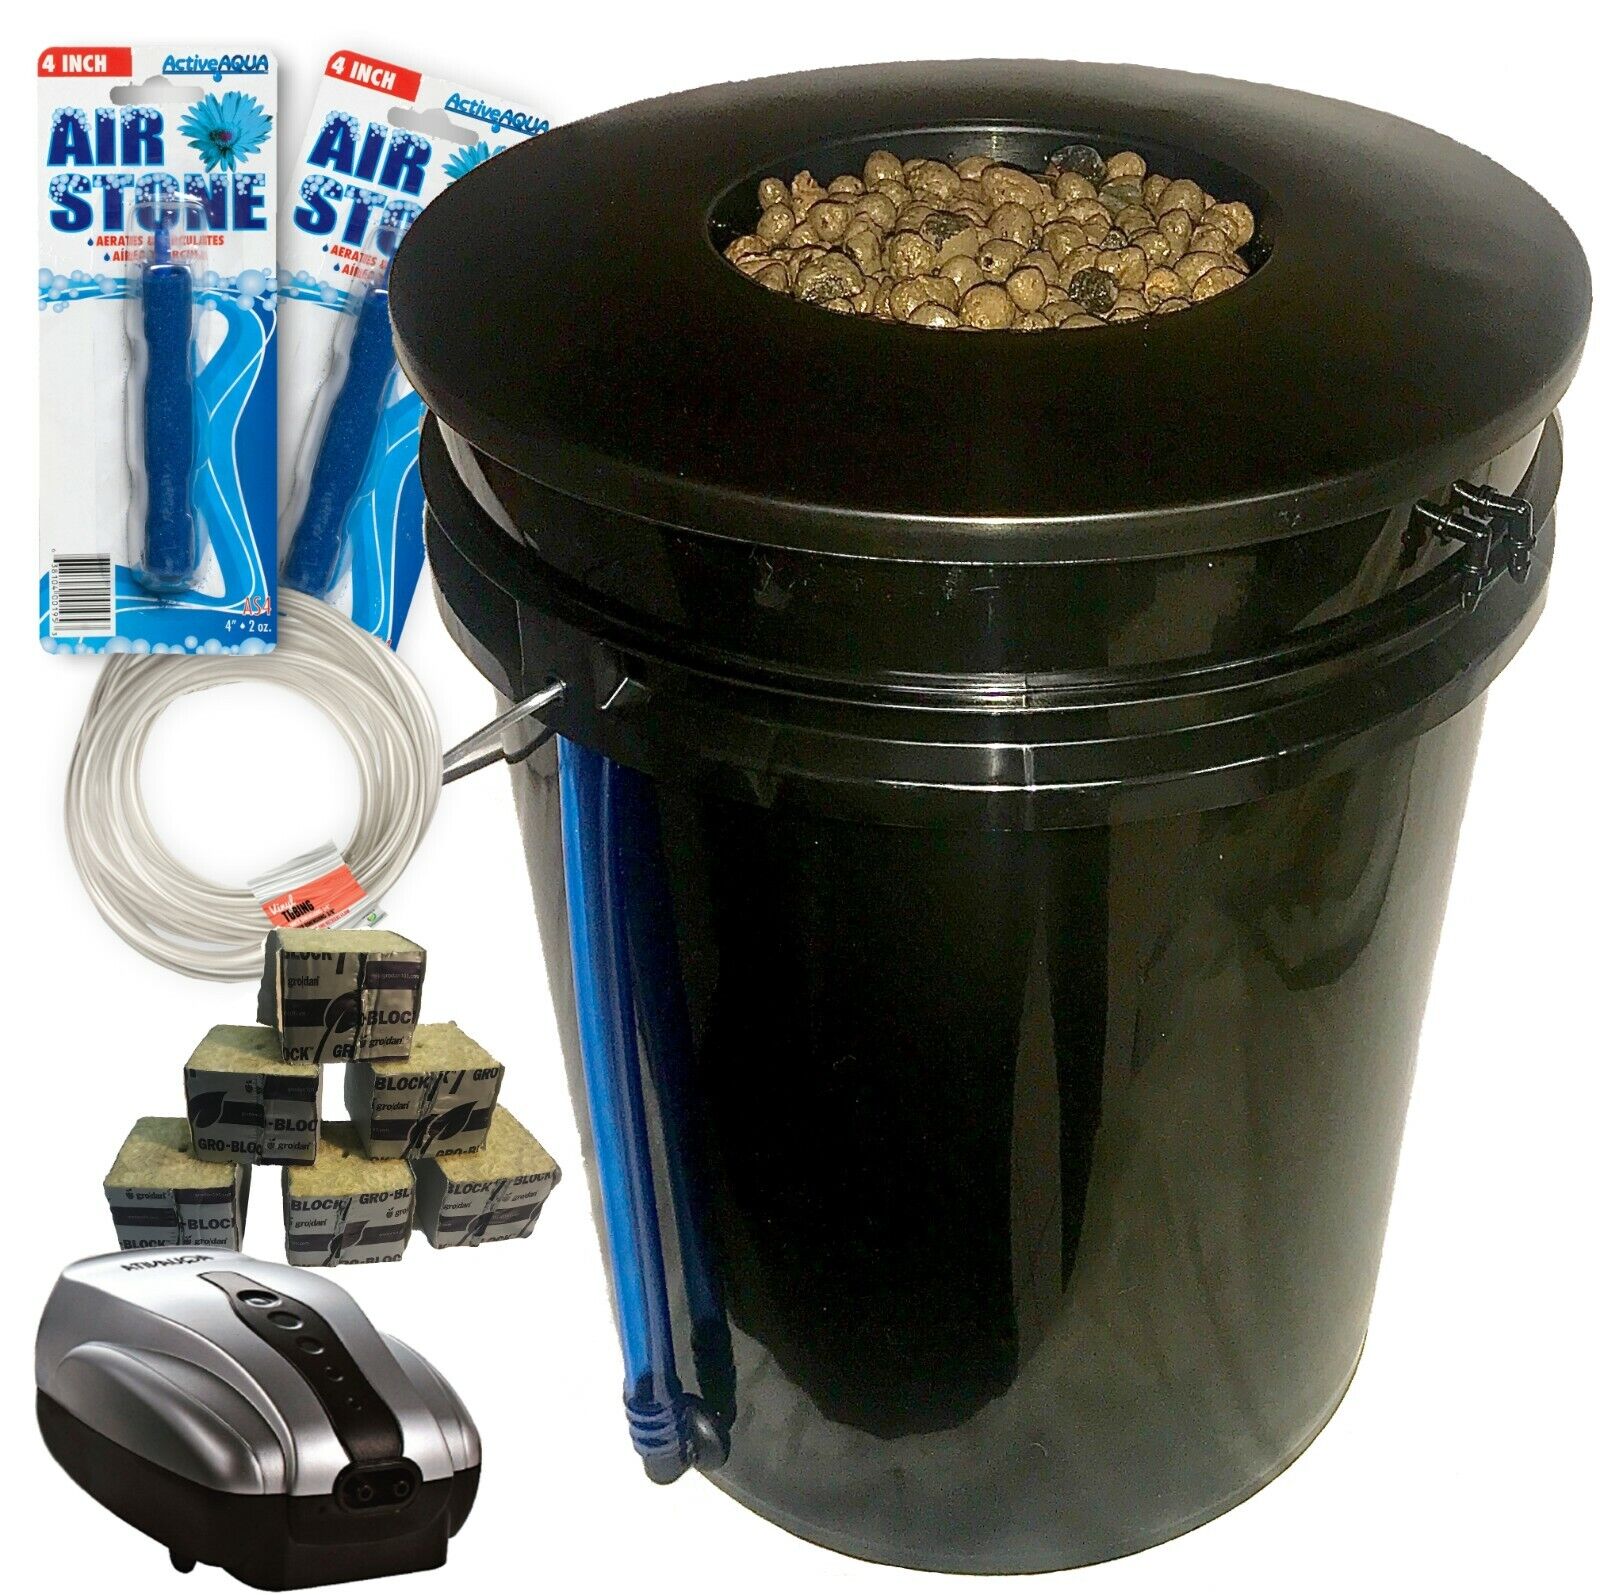 The Atwater HydroPod - DWC Hydroponic System Kit - No Nutrients or pH Testing